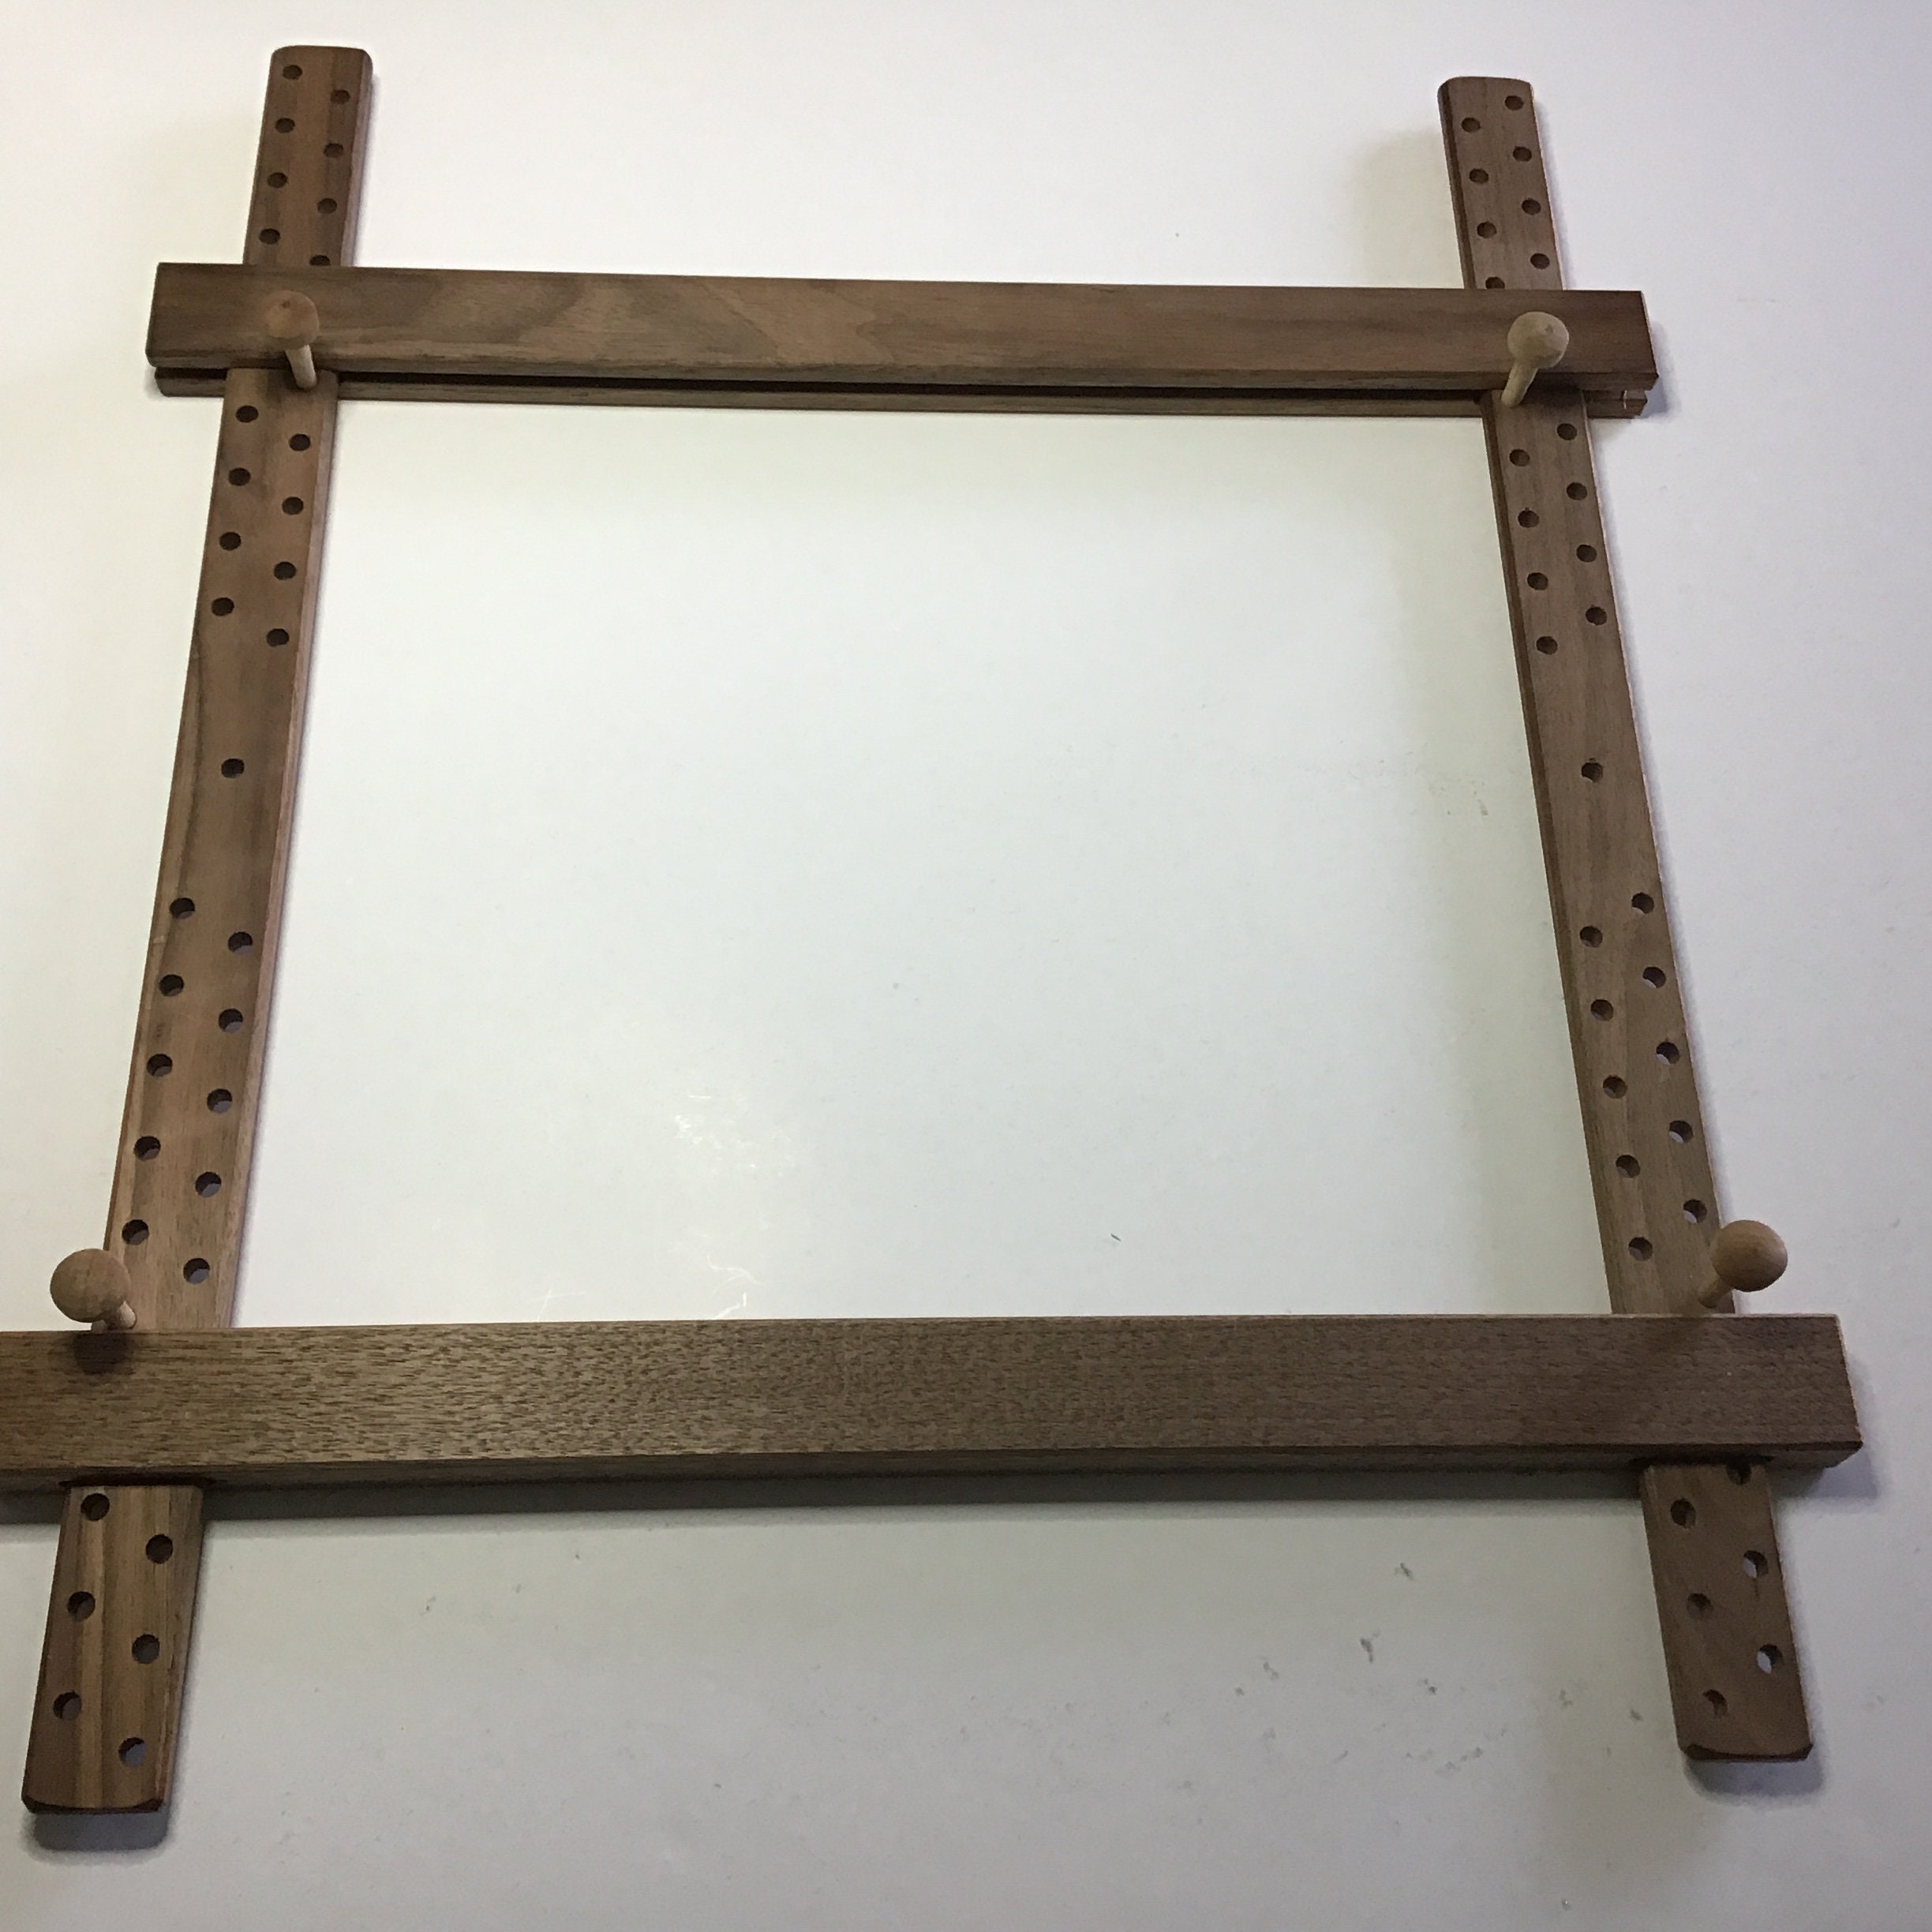 Slate Frames for Hand Embroidery! Yippee! –